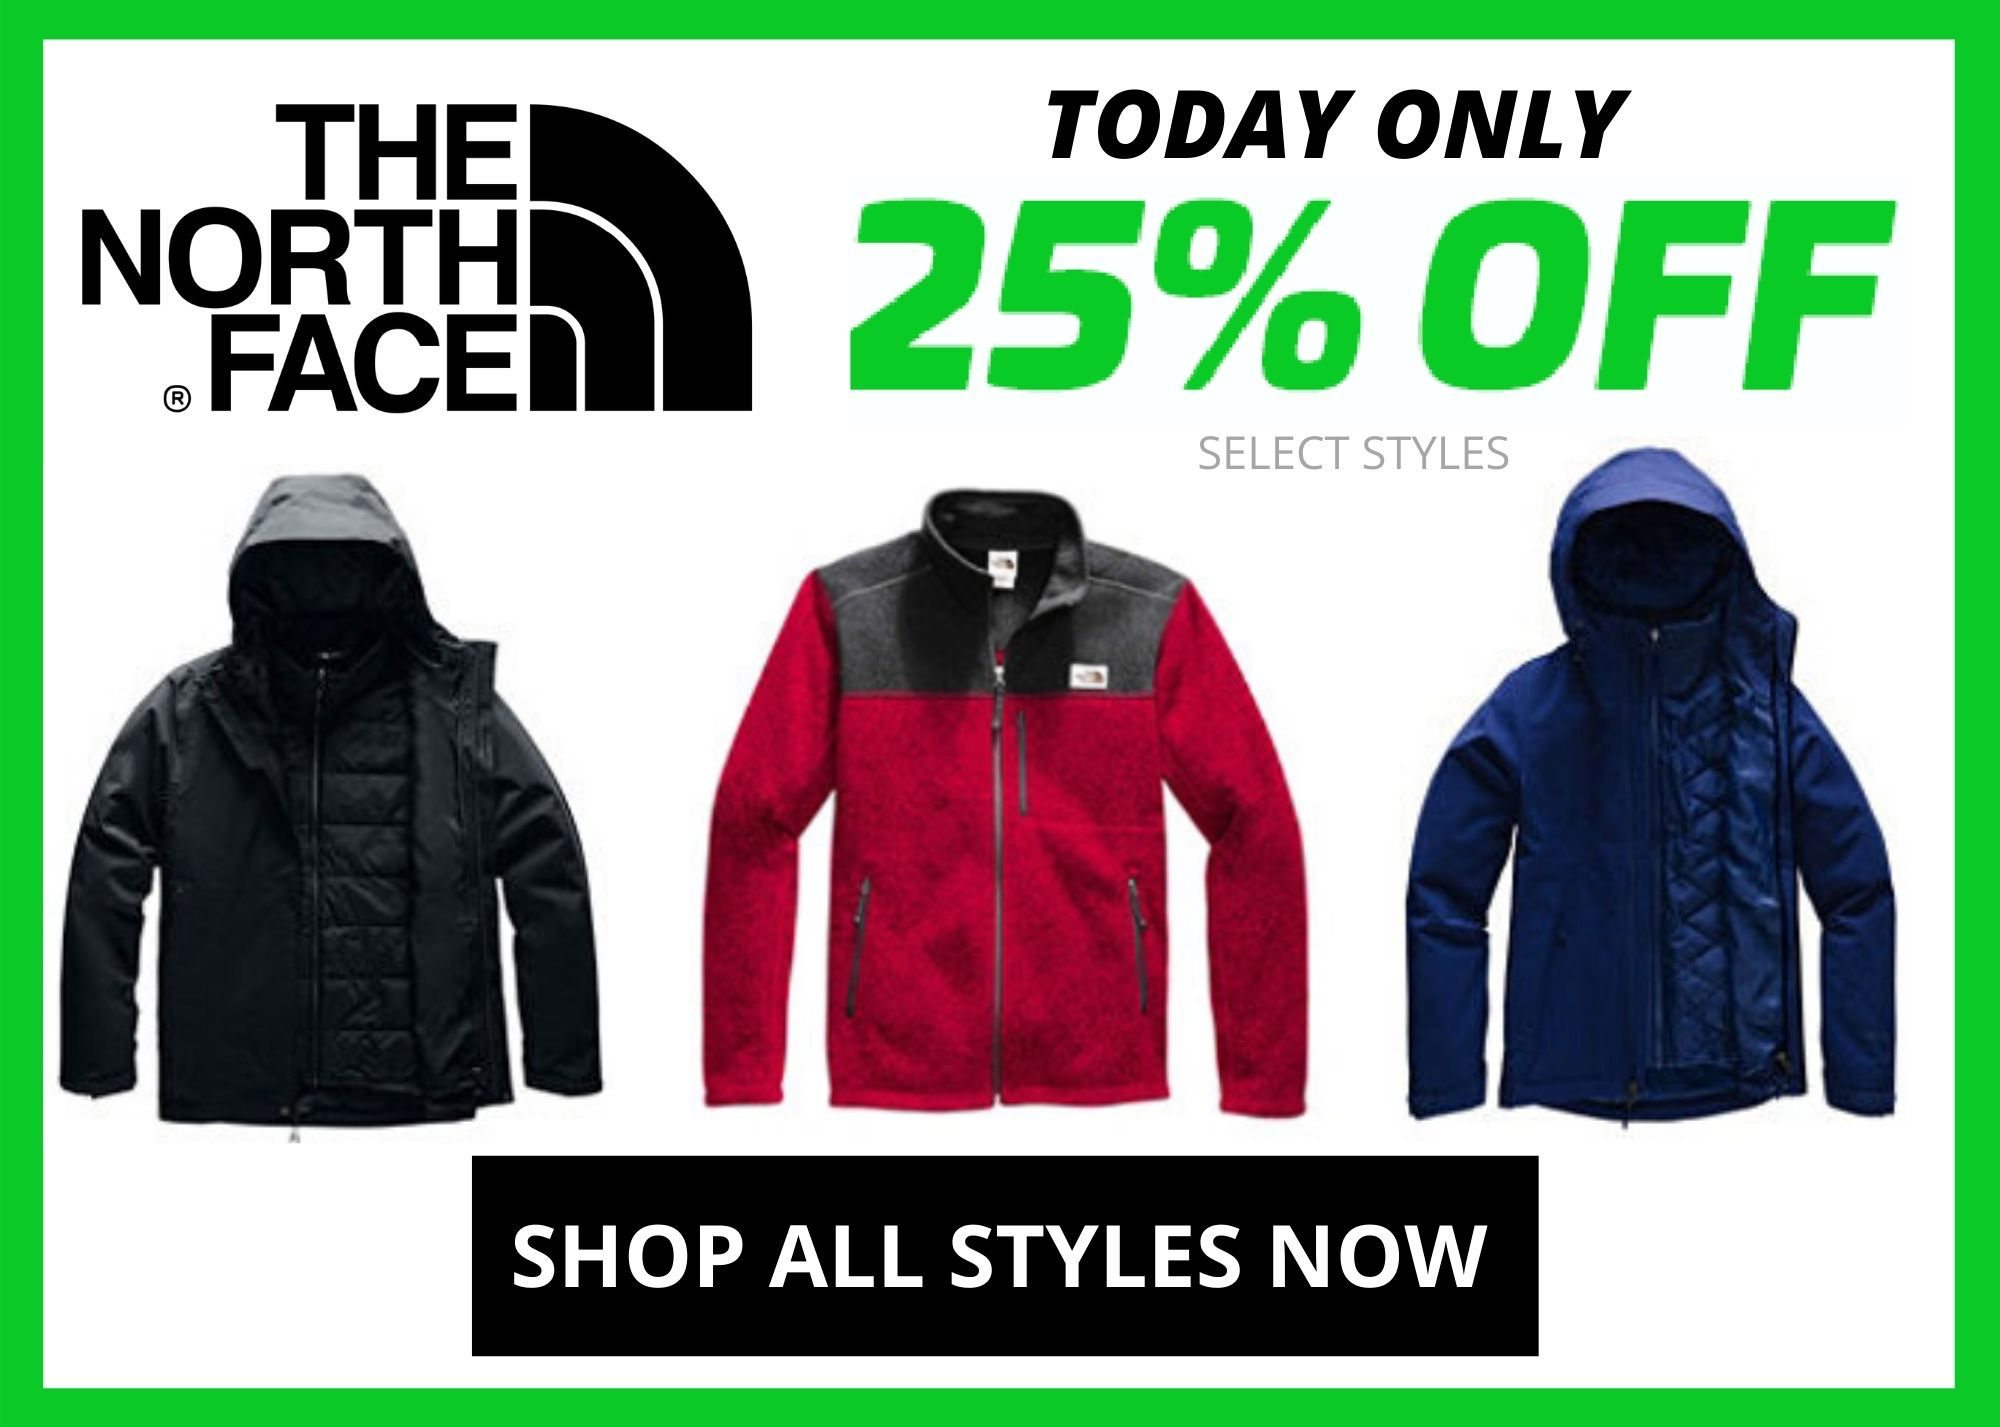 north face 25 off